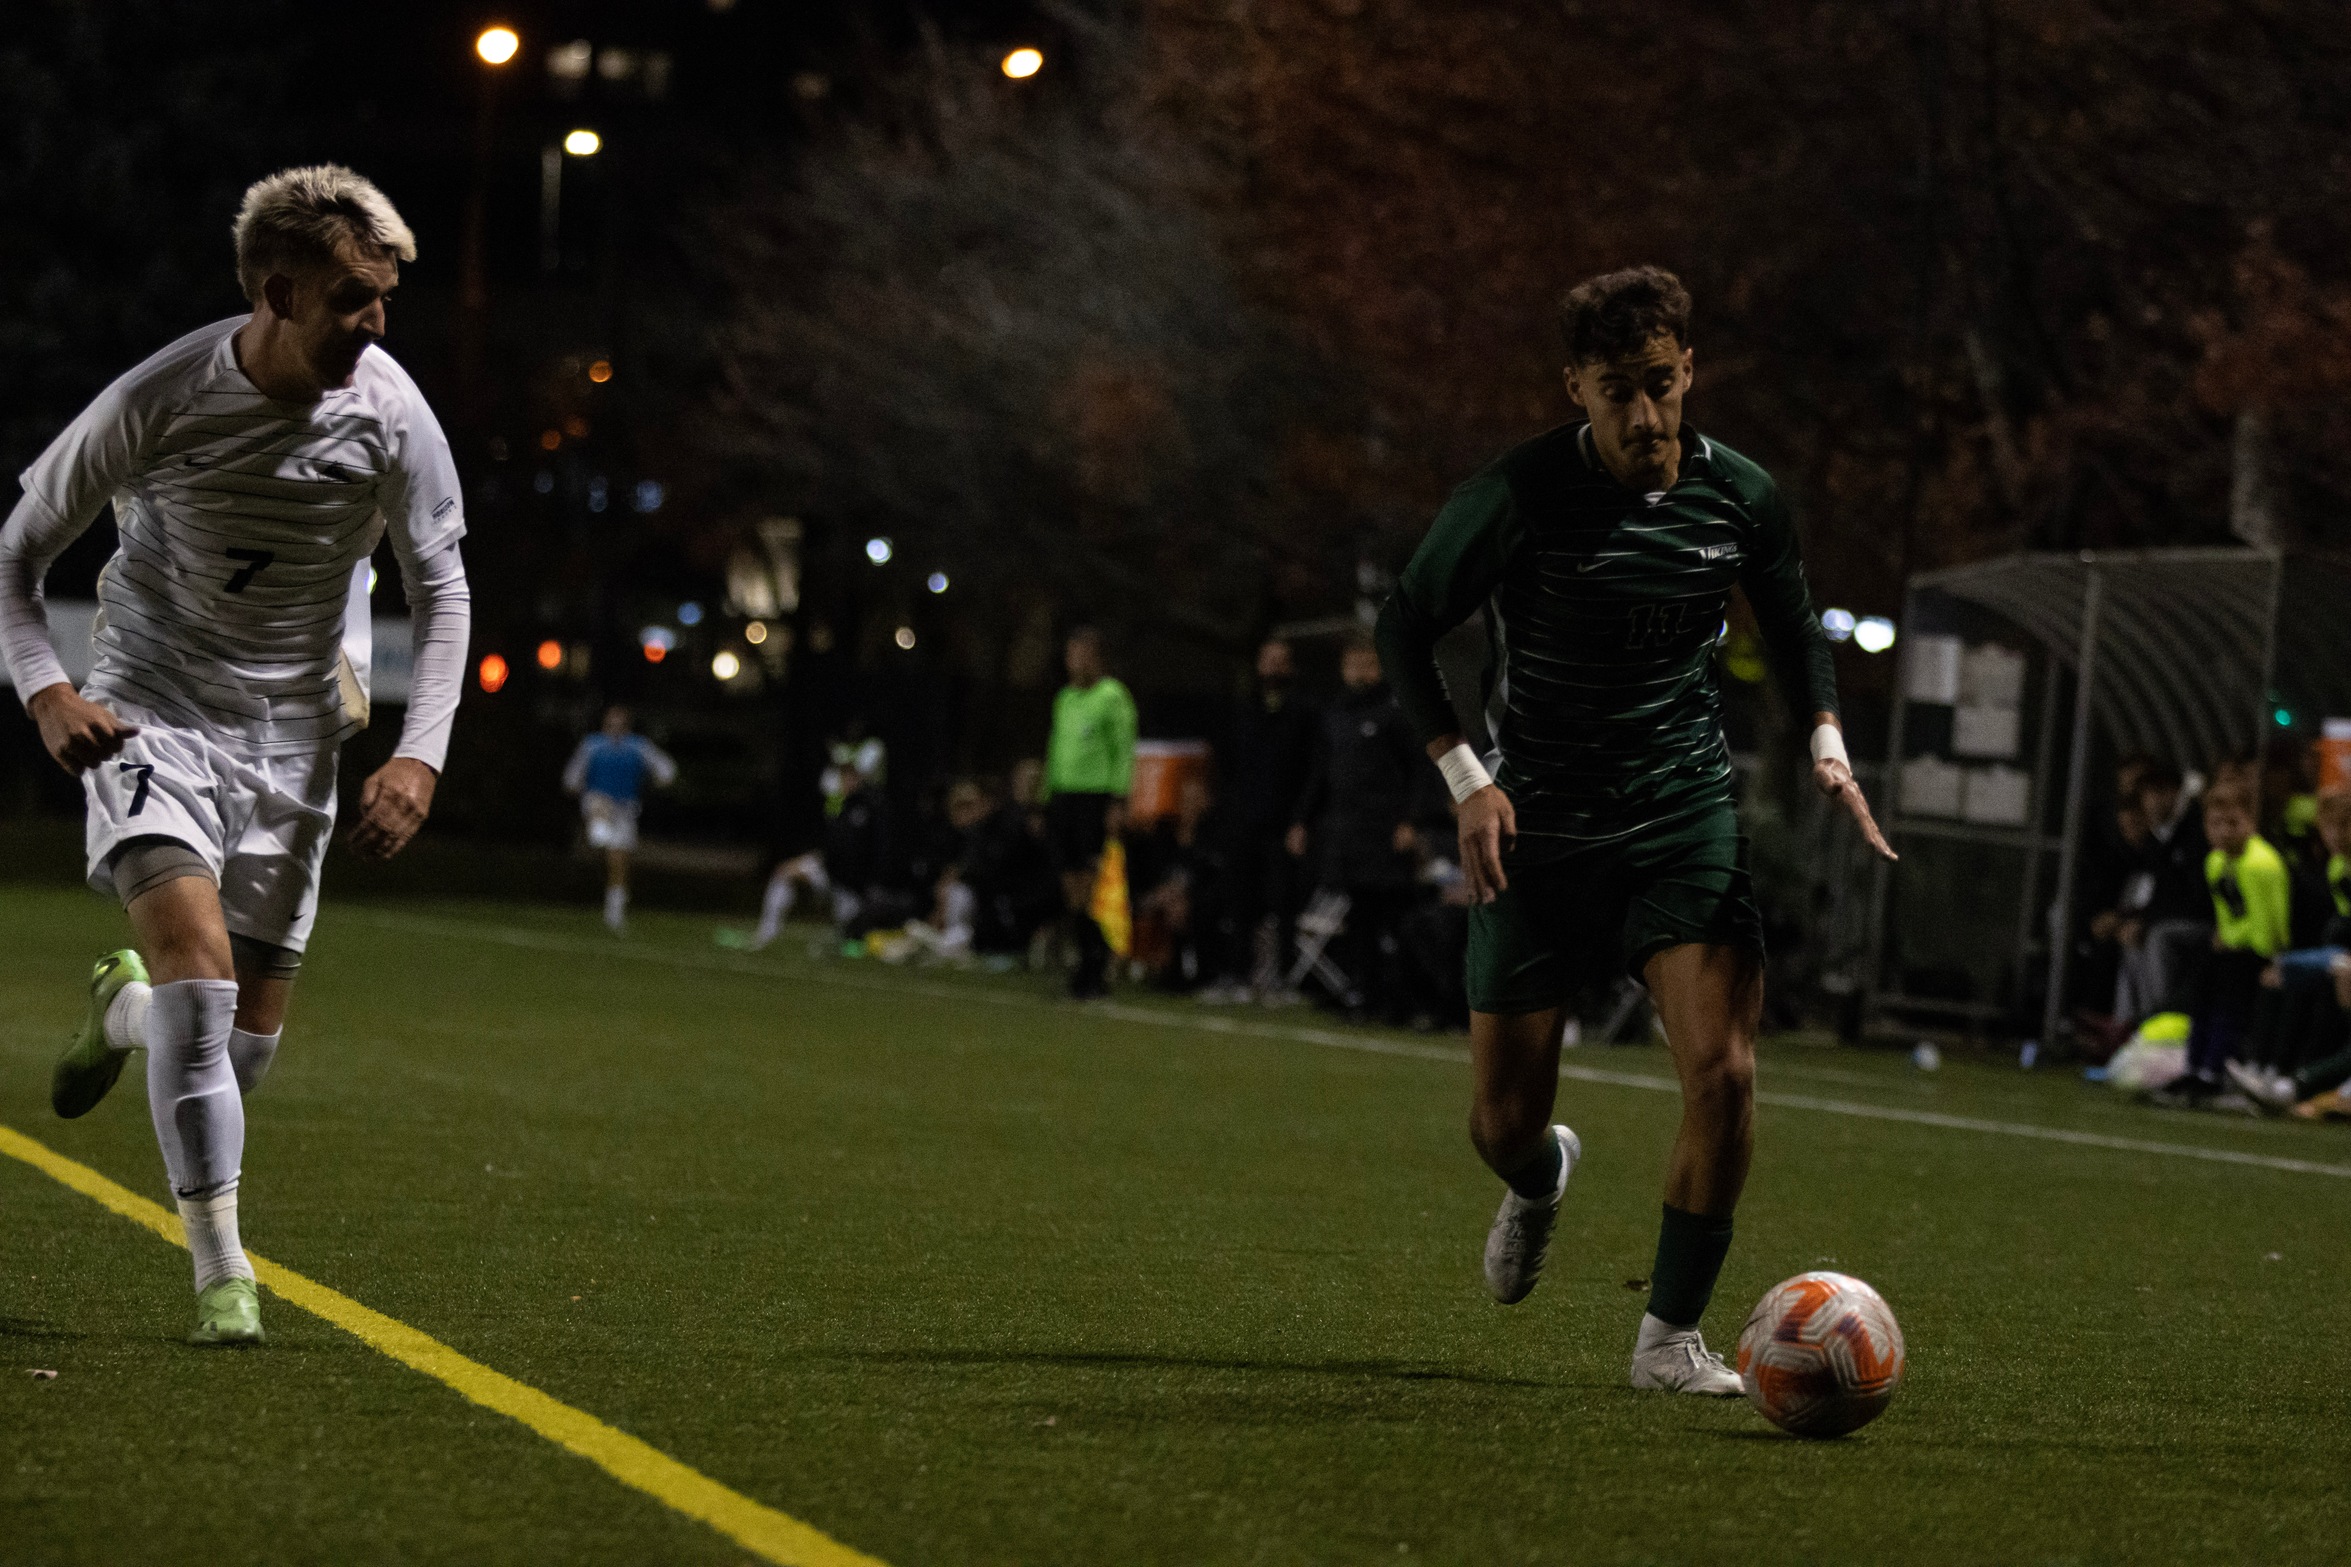 Cleveland State Men's Soccer Concludes Regular Season at Home Against Green Bay